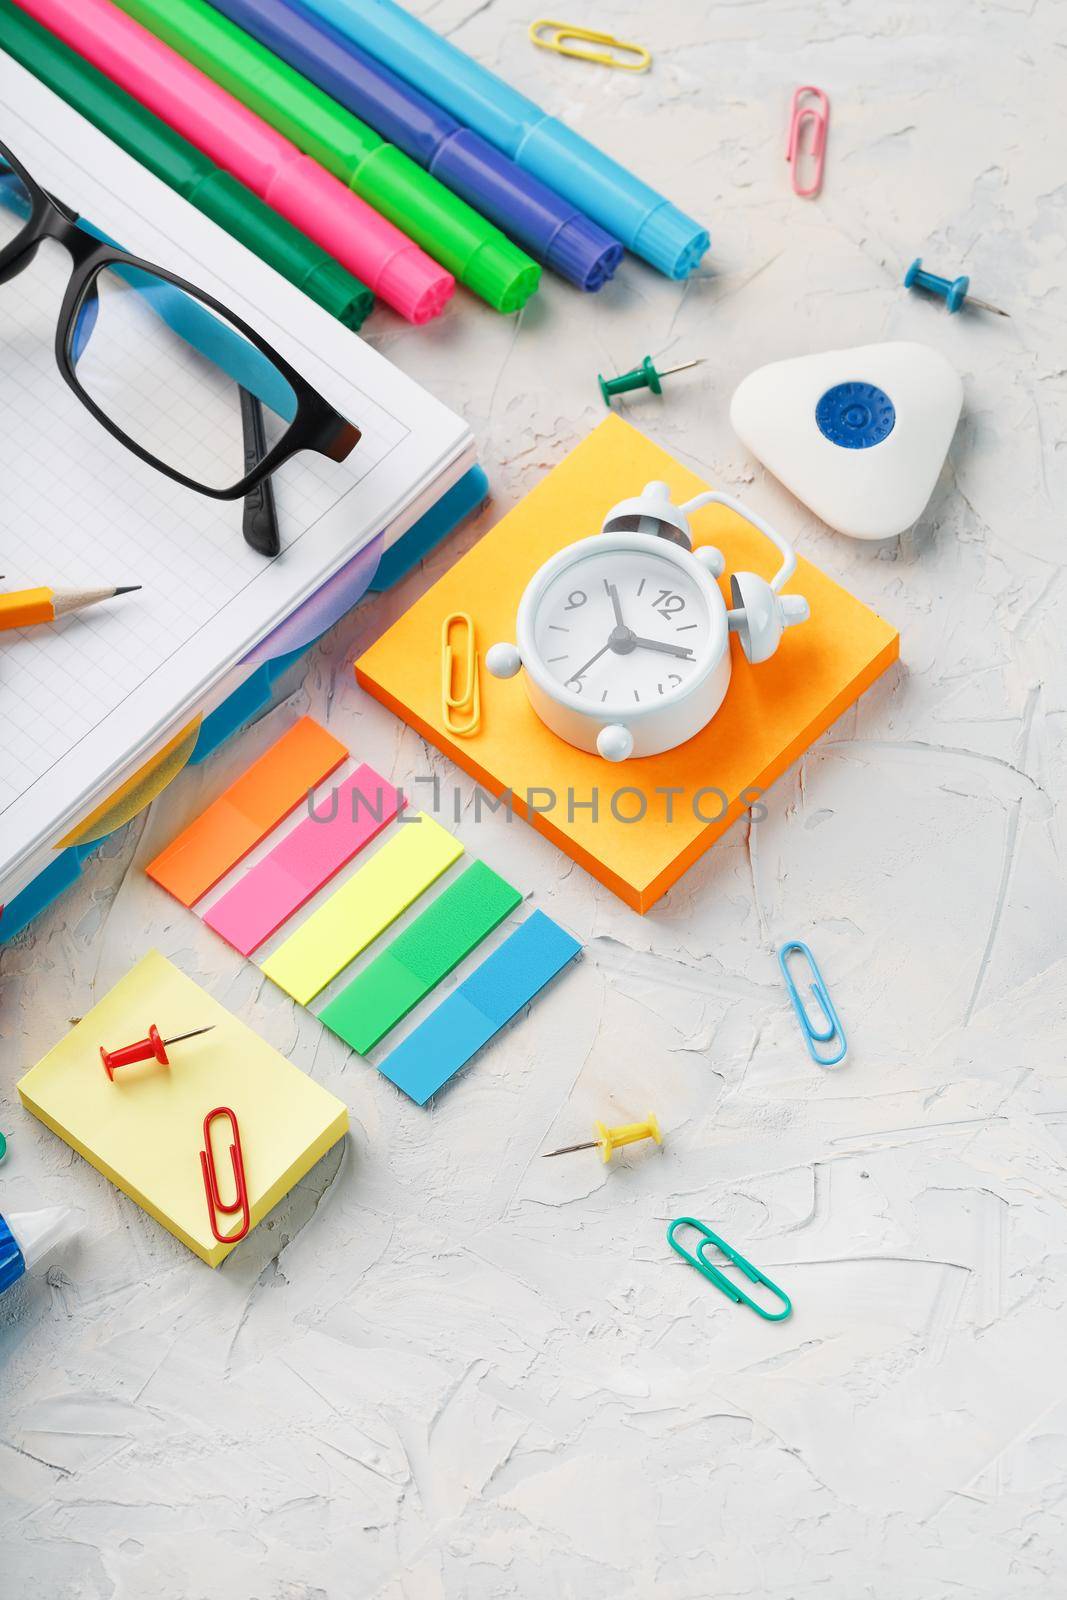 Stationery for school and creative work are on a gray background. Free space, top view